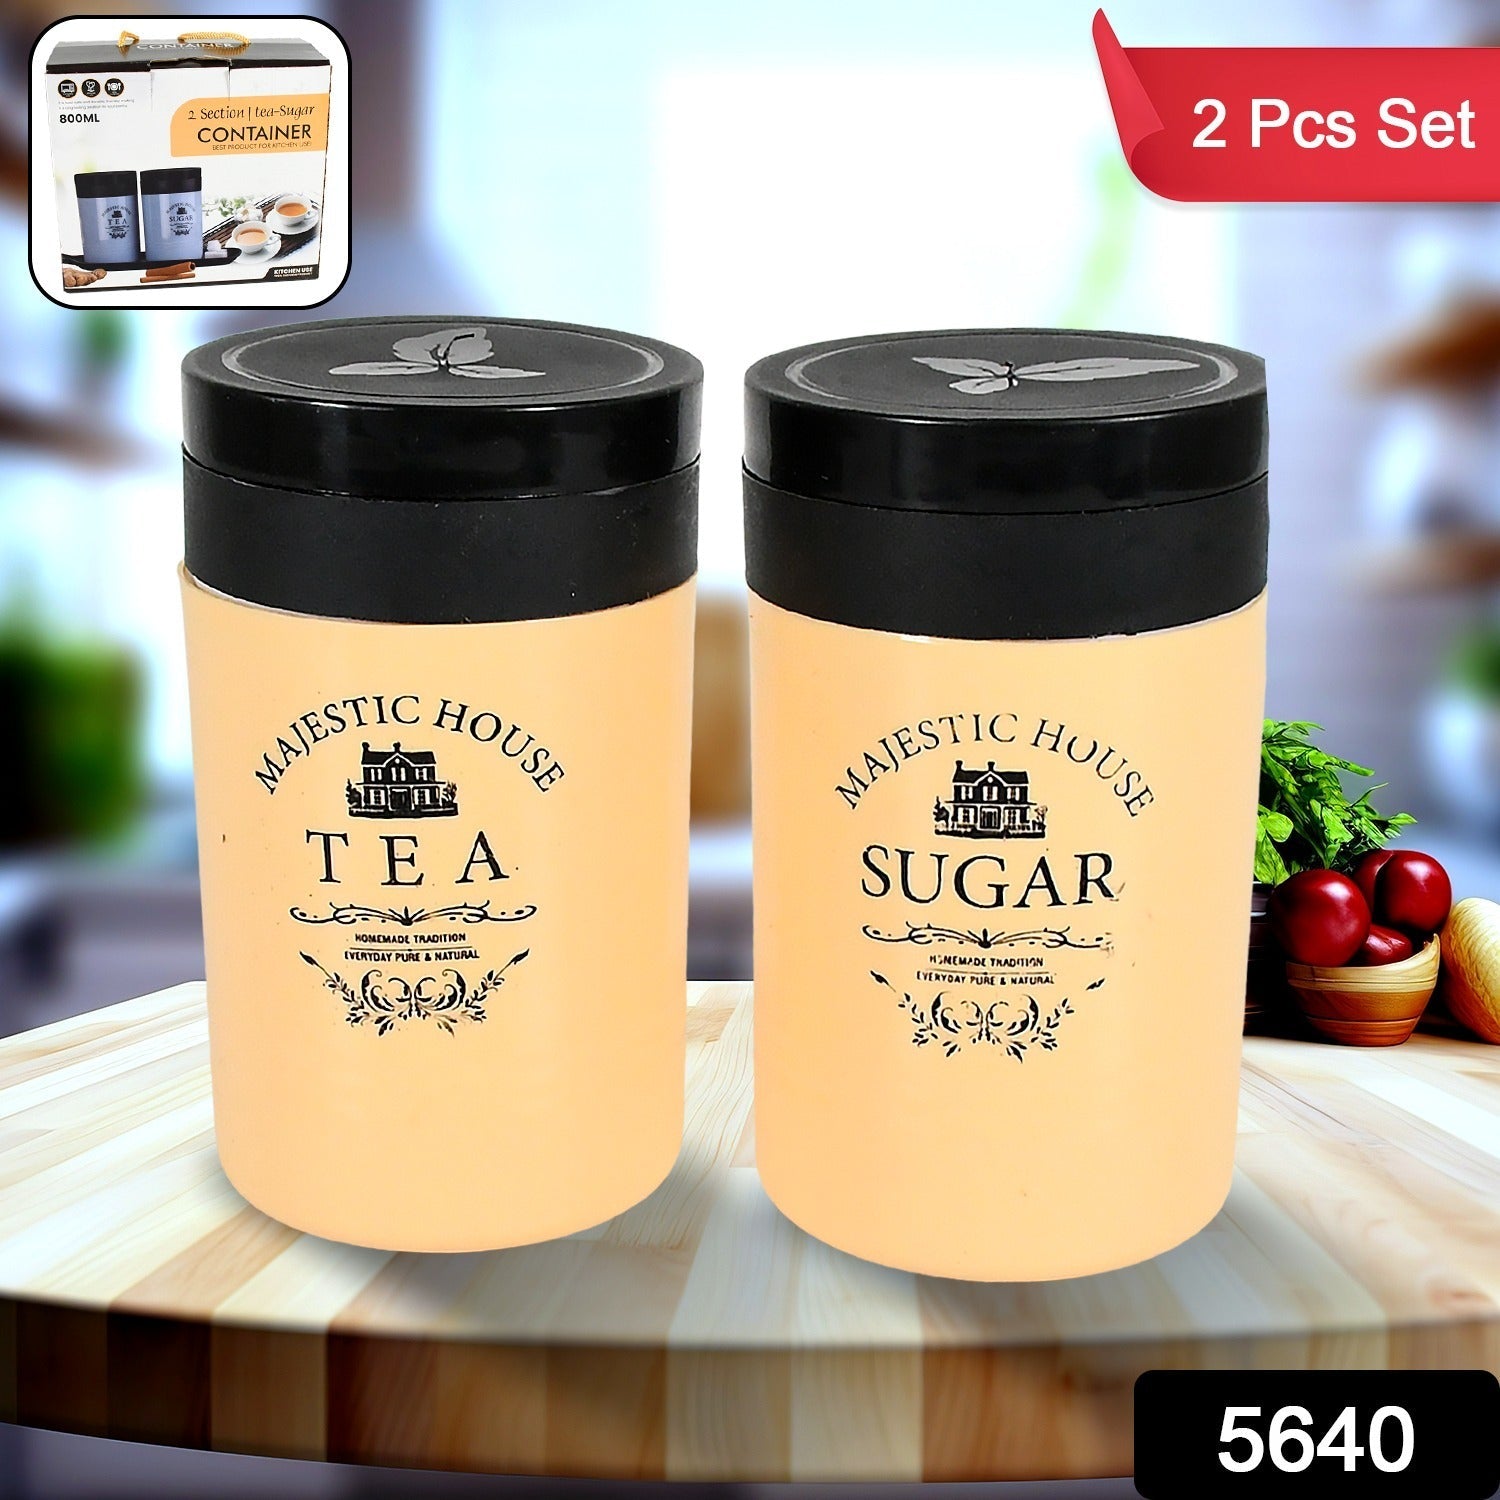 5640 Accurate Seal Tea Sugar Coffee Container, Plastic Damru Shaped Tea, Coffee, Sugar Canisters Jar, New Airtight Food Seal Containers for Salt, Dry Fruit, Grocery 2 Section (800 ML Approx)